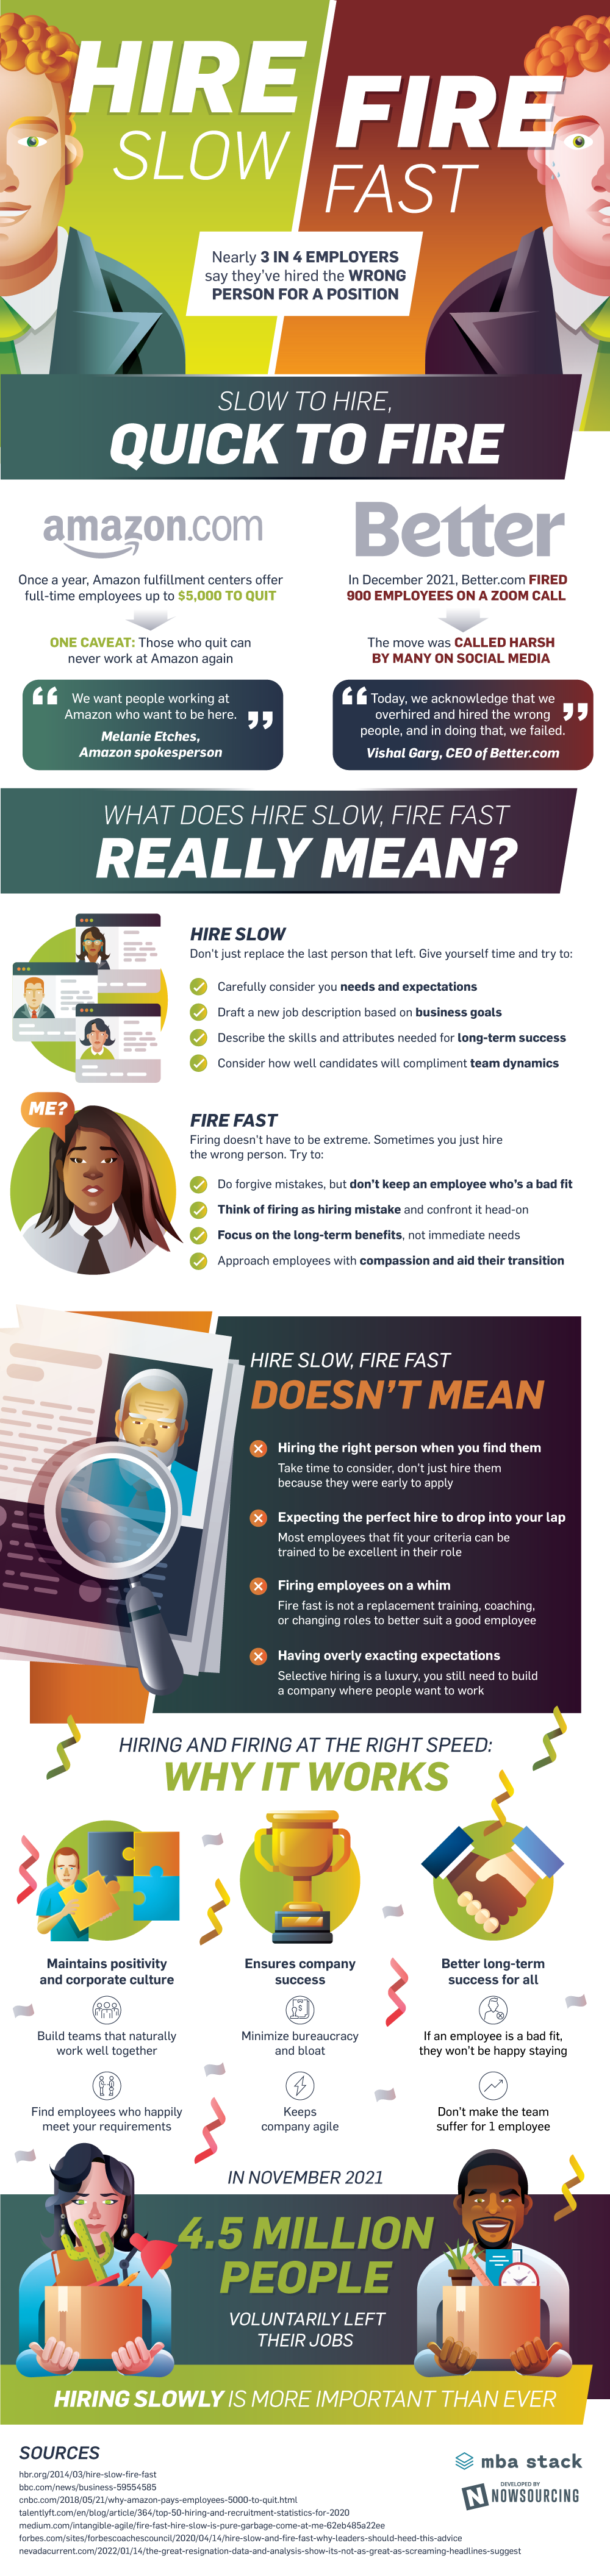 Infographic: What does hire slow, fire fast mean?